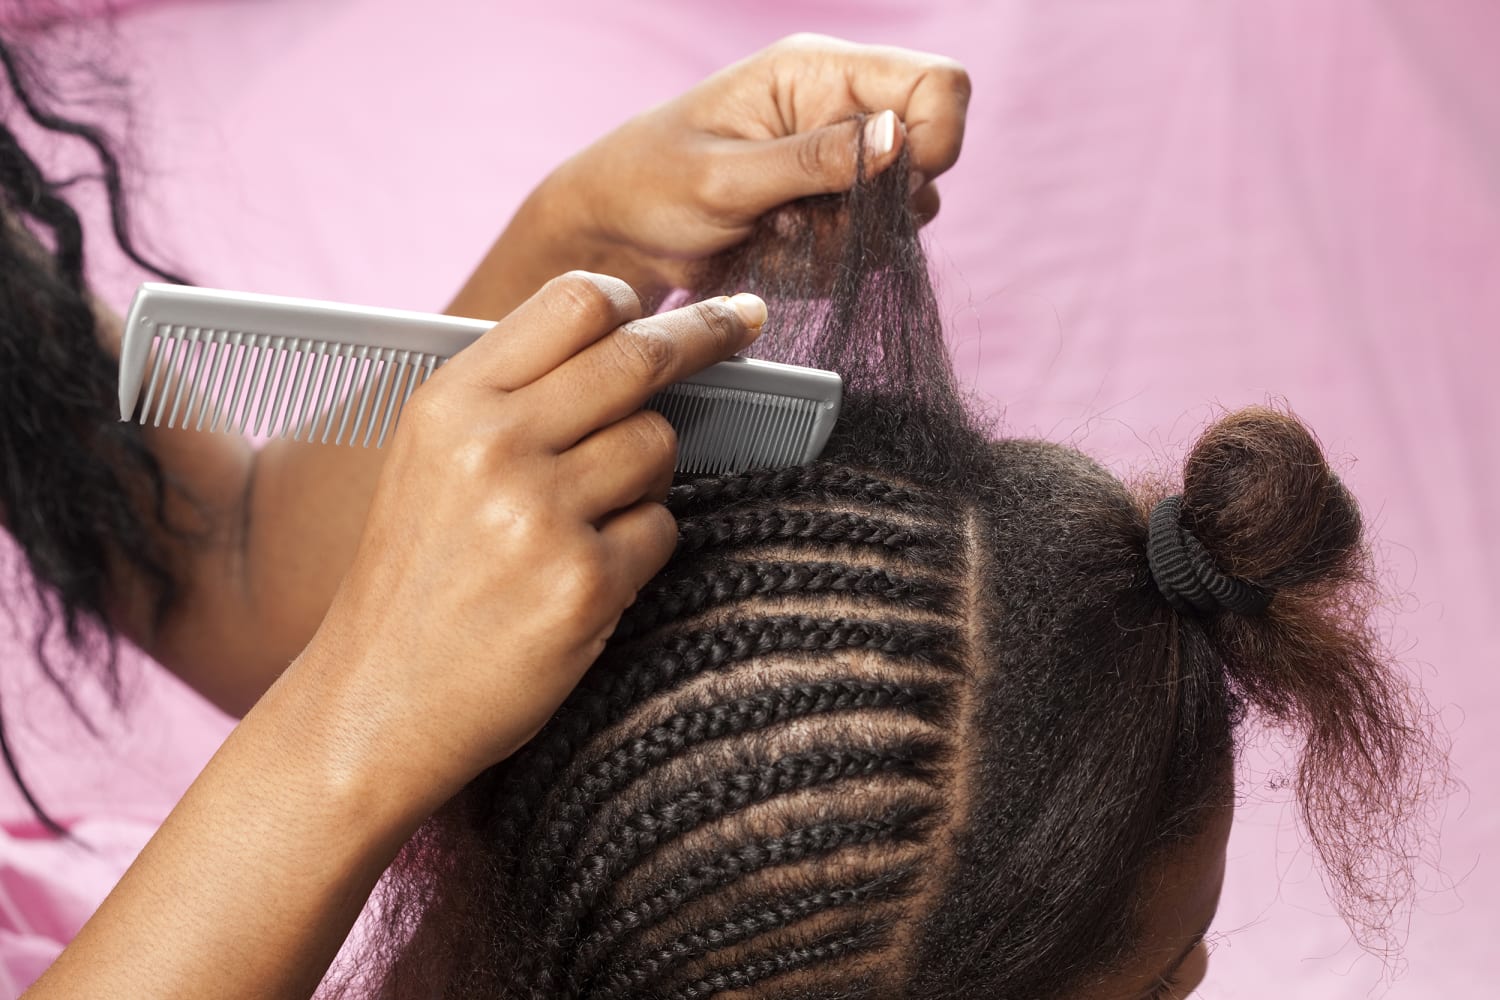 It's my hair': Baltimore looks to ban hair discrimination